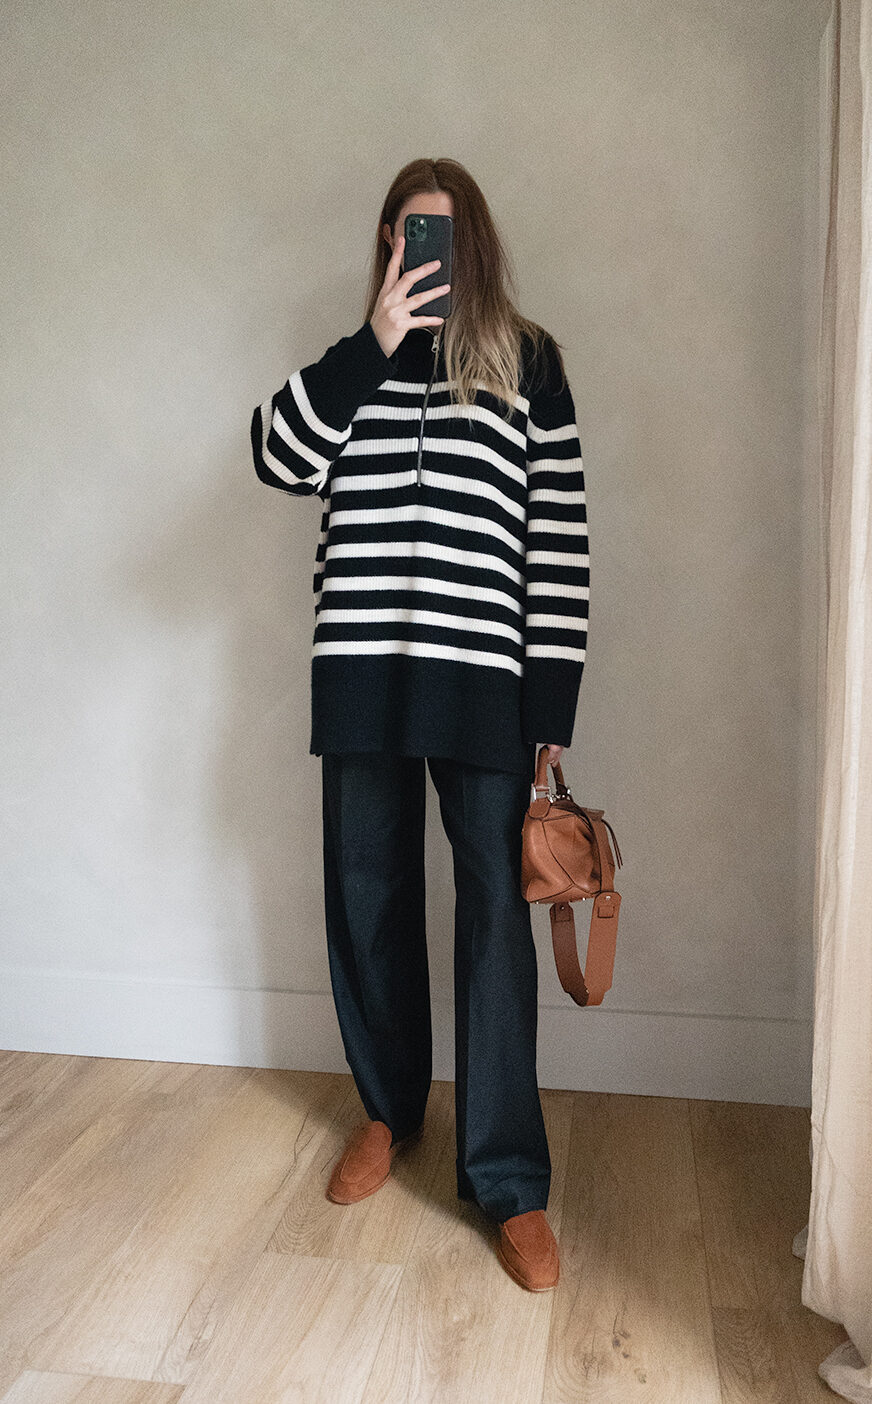 Emma Hill style. Black white stripe half zip chunky jumper sweater, black tailored trousers, tan leather small Loewe Puzzle bag, tan suede loafers. Chic Spring outfit